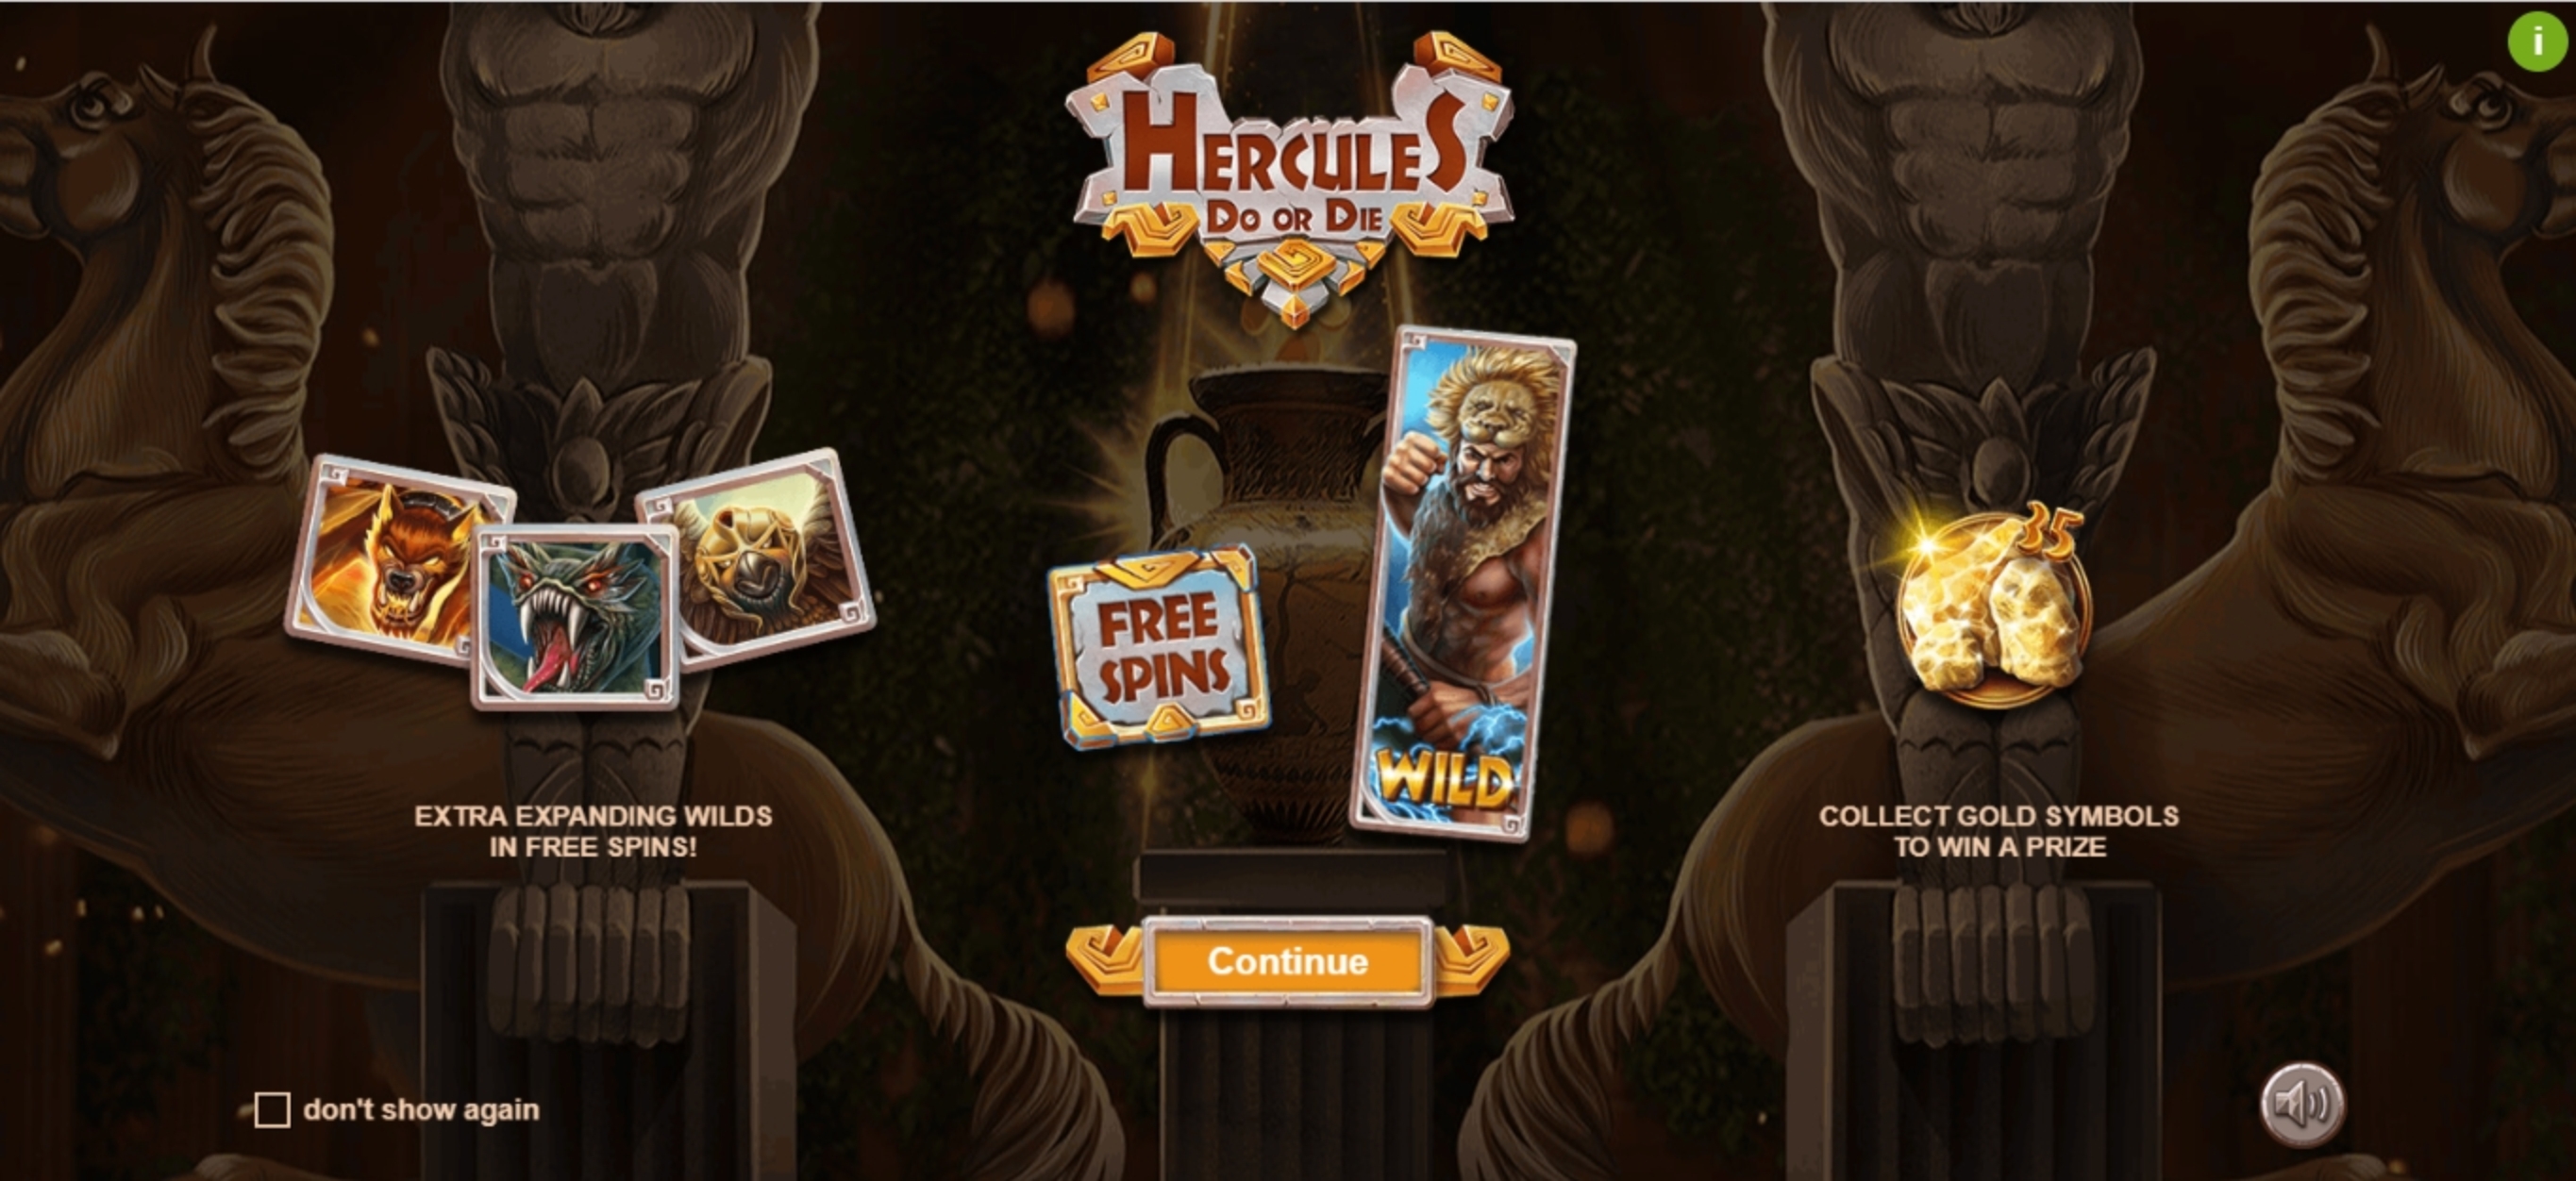 Play Hercules Do or Die Free Casino Slot Game by Leap